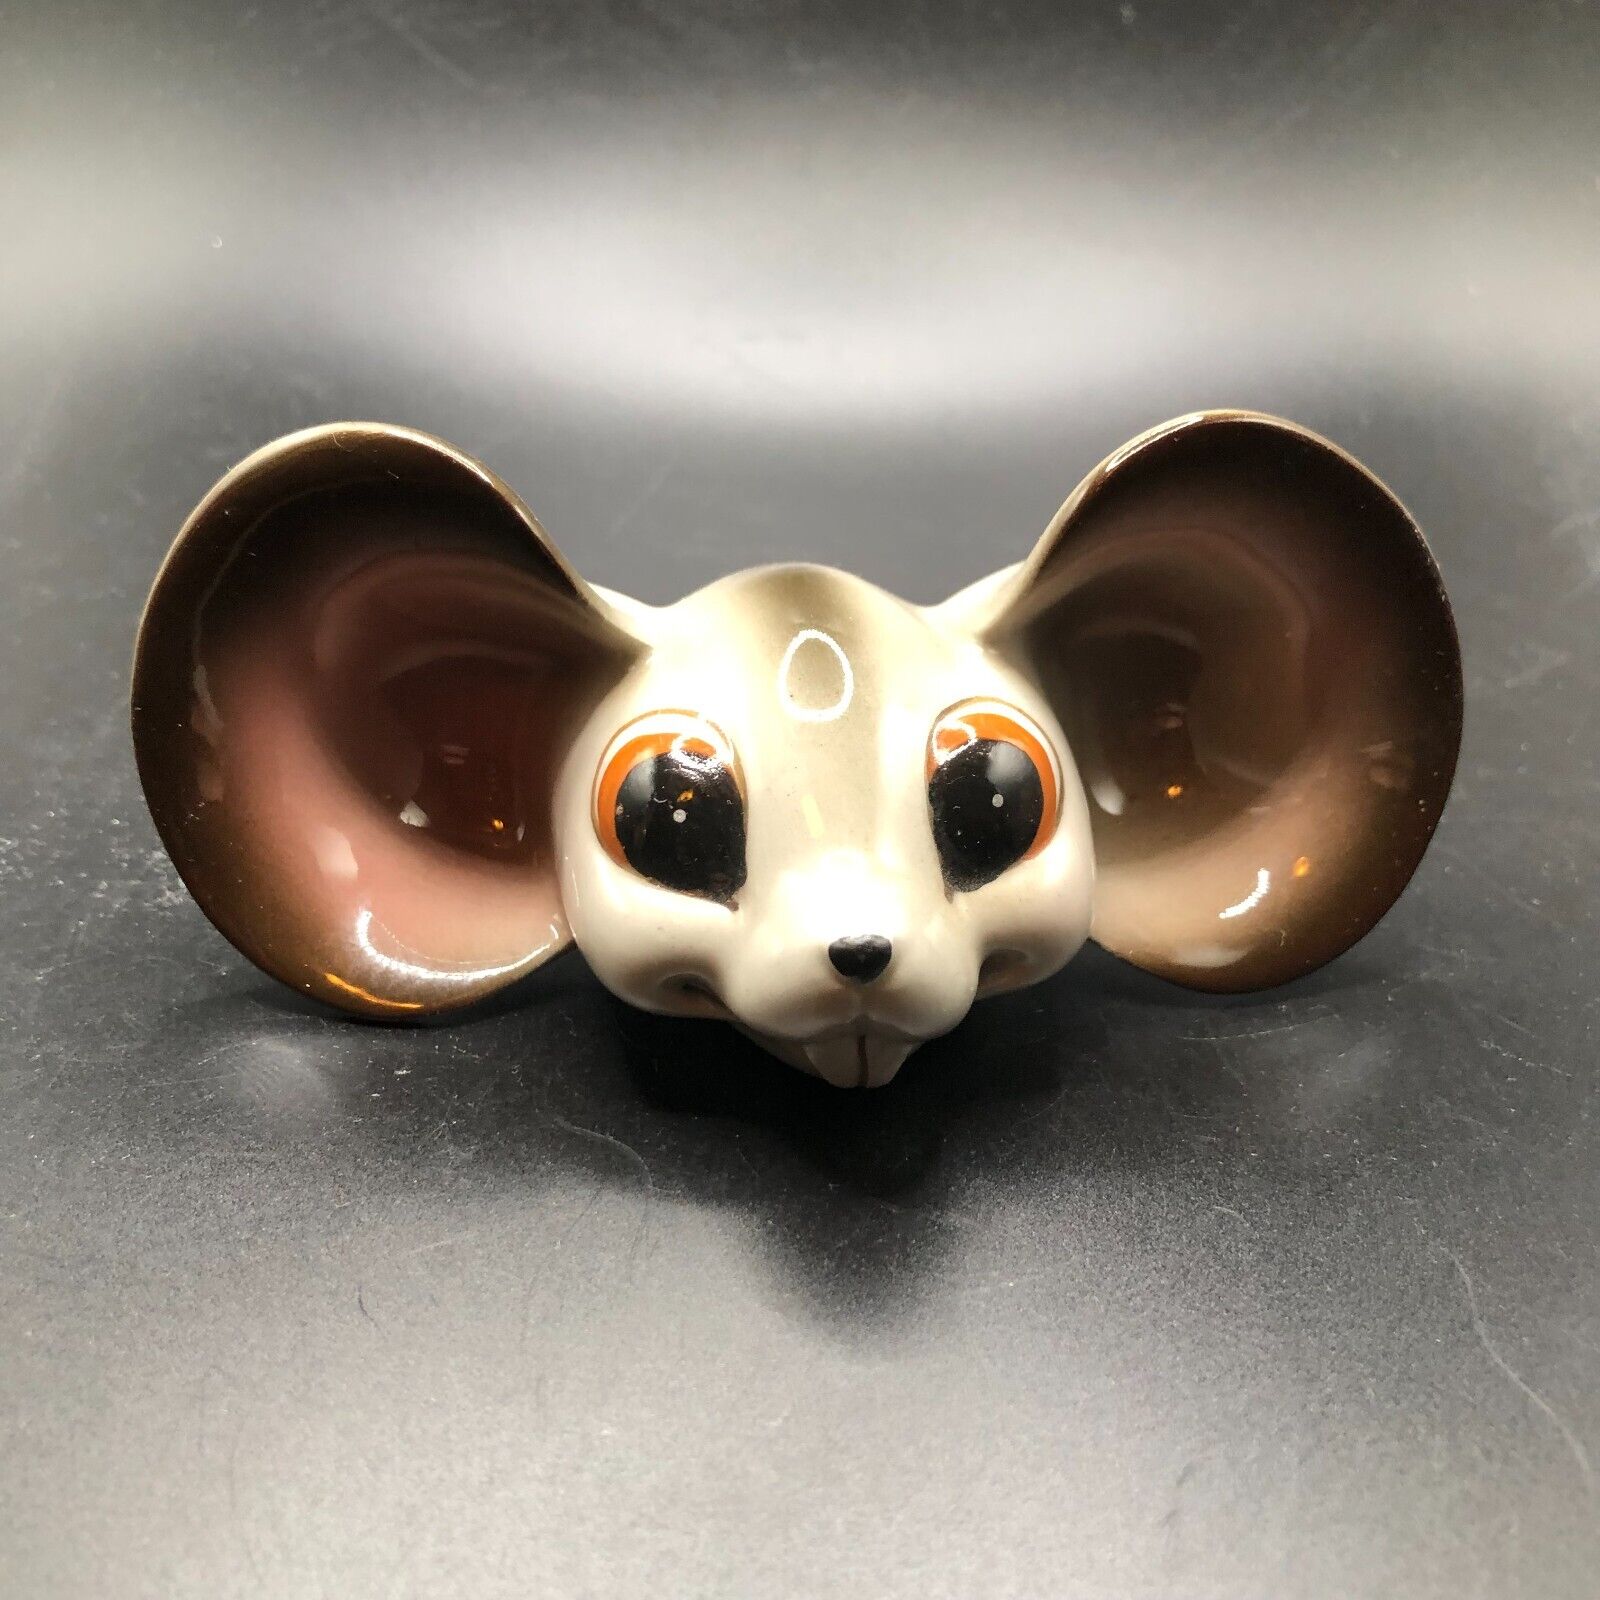 Vintage Norcrest Gray Mouse Ceramic Nodder Bobblehead Figurine HEAD ONLY No Body